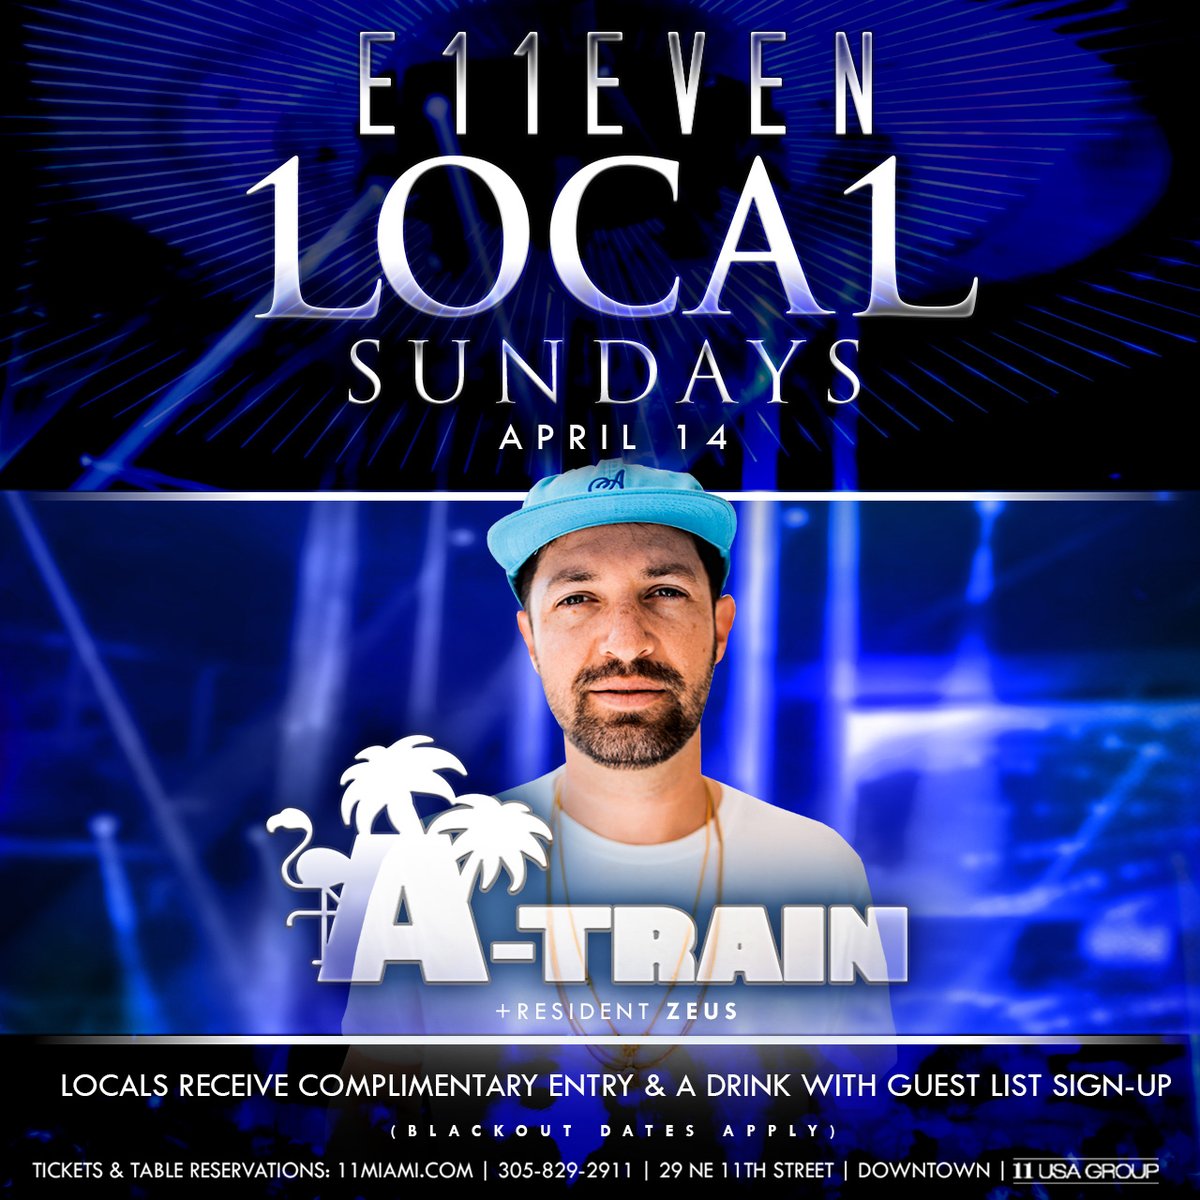 This ain't Texas! ⁠ #LocalSundays guest list sign-up for entry & drink. ⁠ Sounds by @DjAtrain⁠ #E11EVEN #Miami